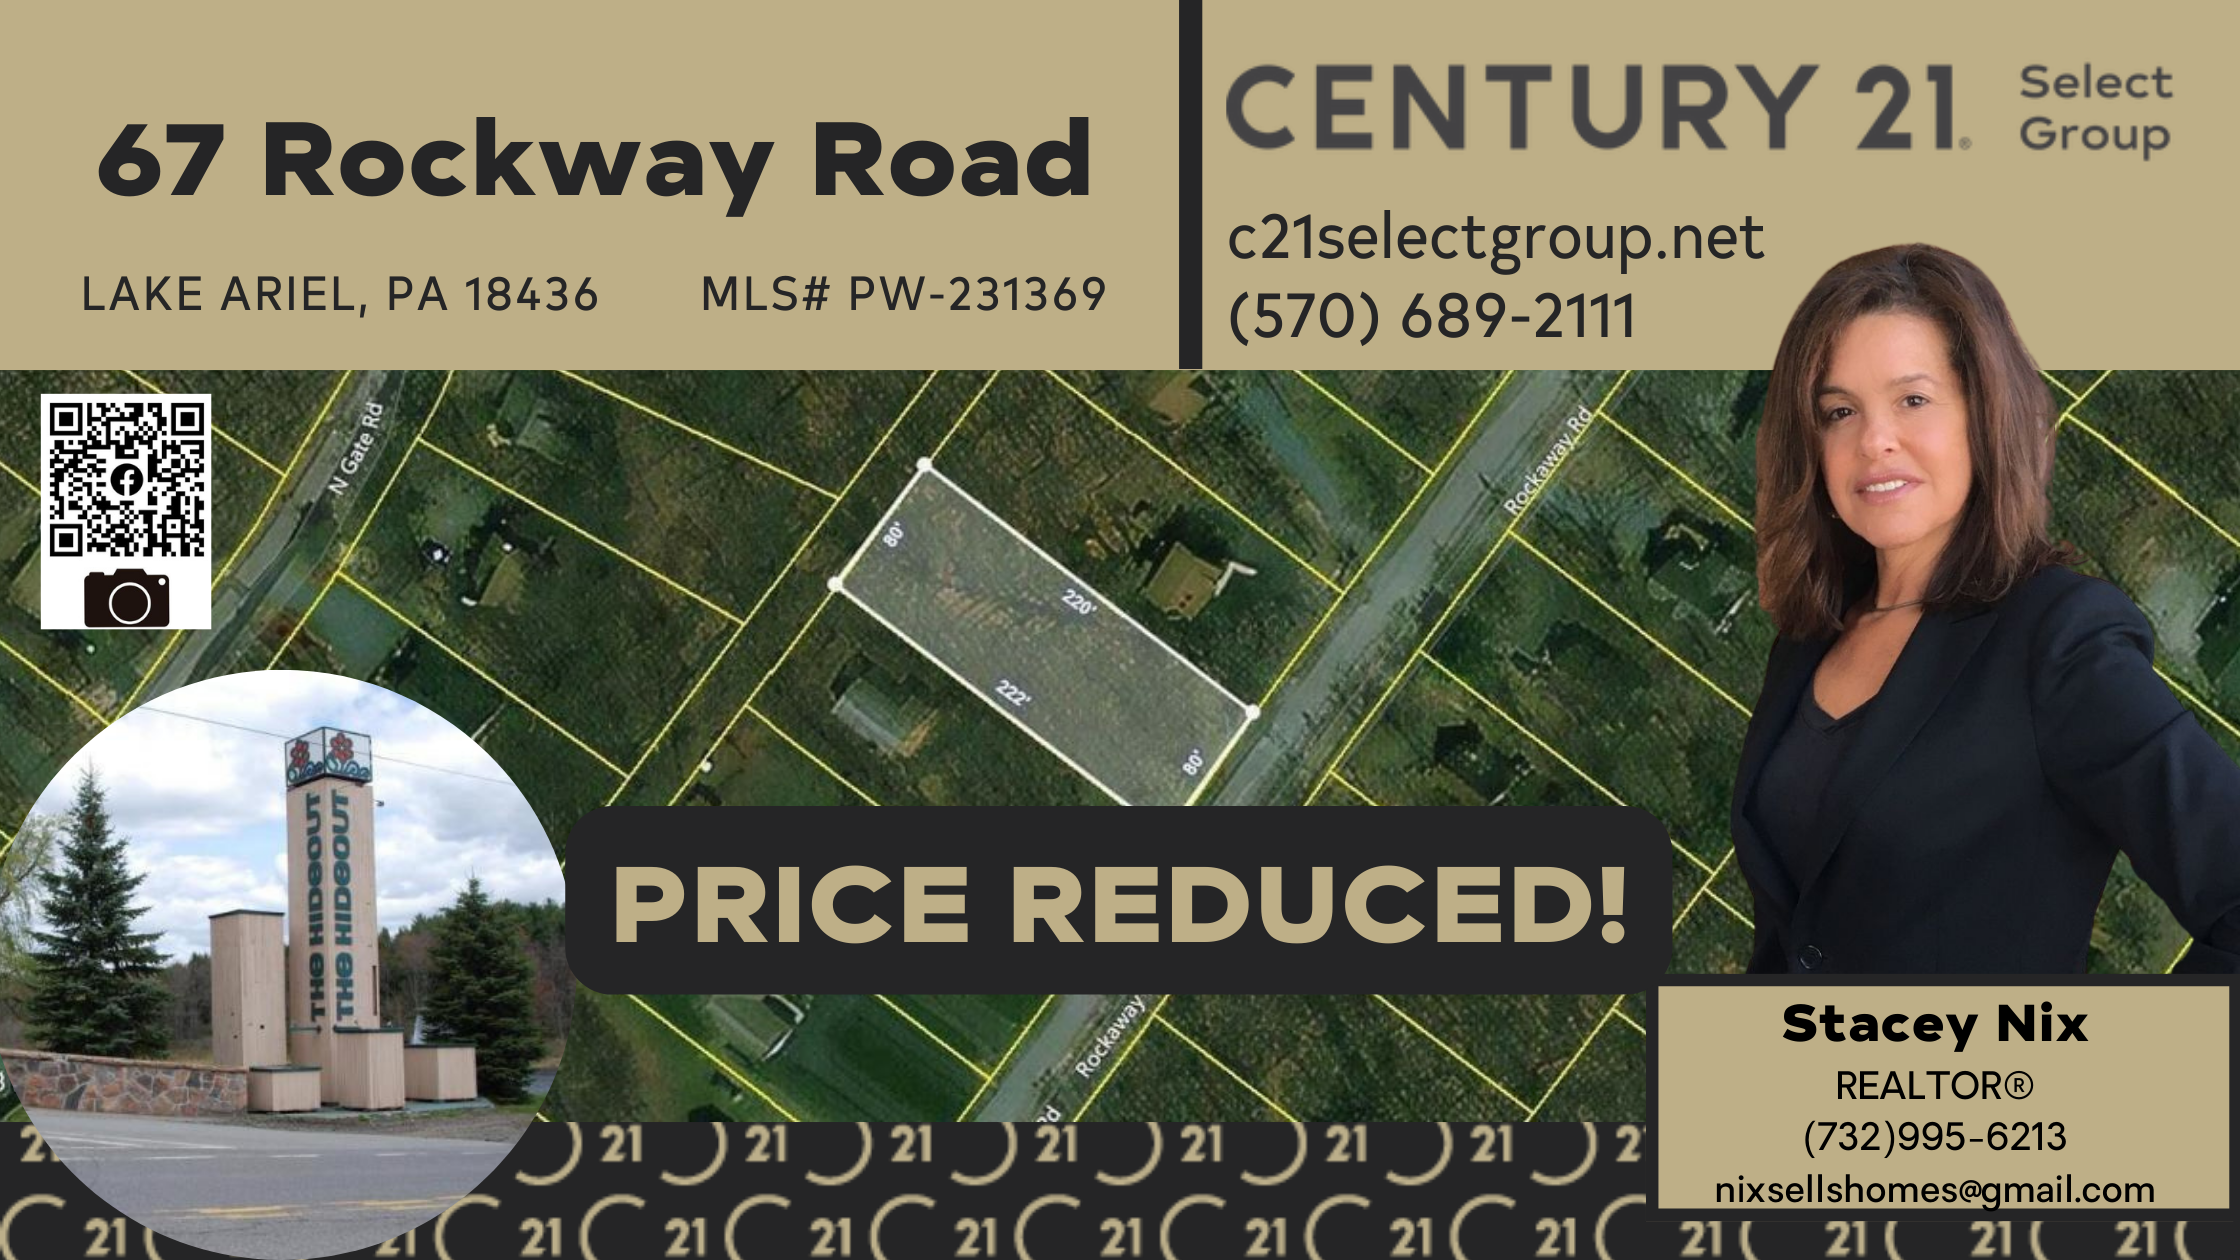 PRICE REDUCED! 67 Rockway Road: Level Building Lot in The Hideout